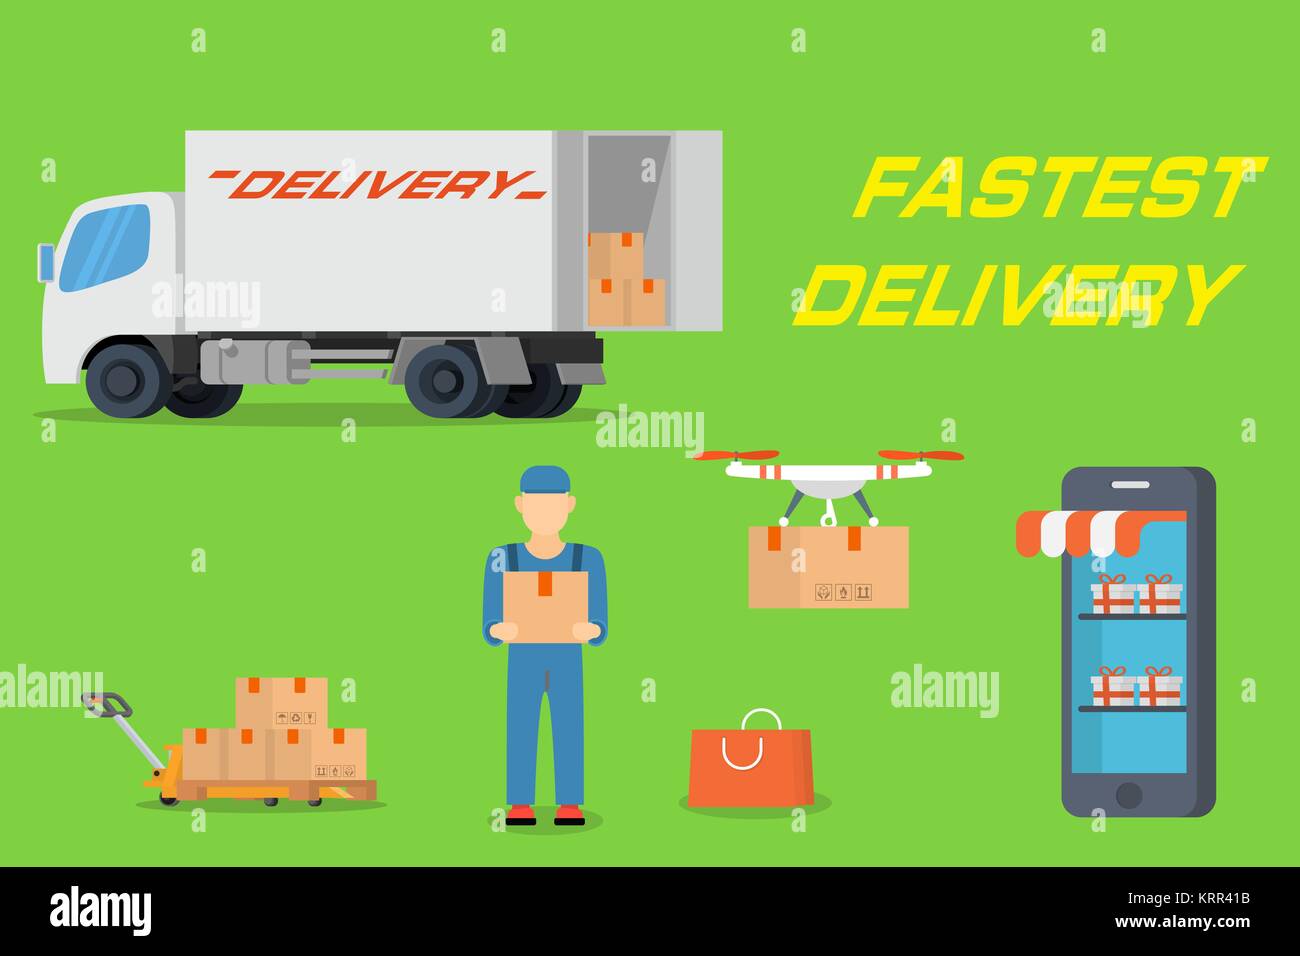 Fastest delivery concept with cargo, quadrocopter, worker man, pallet truck and conceptual shop Stock Vector